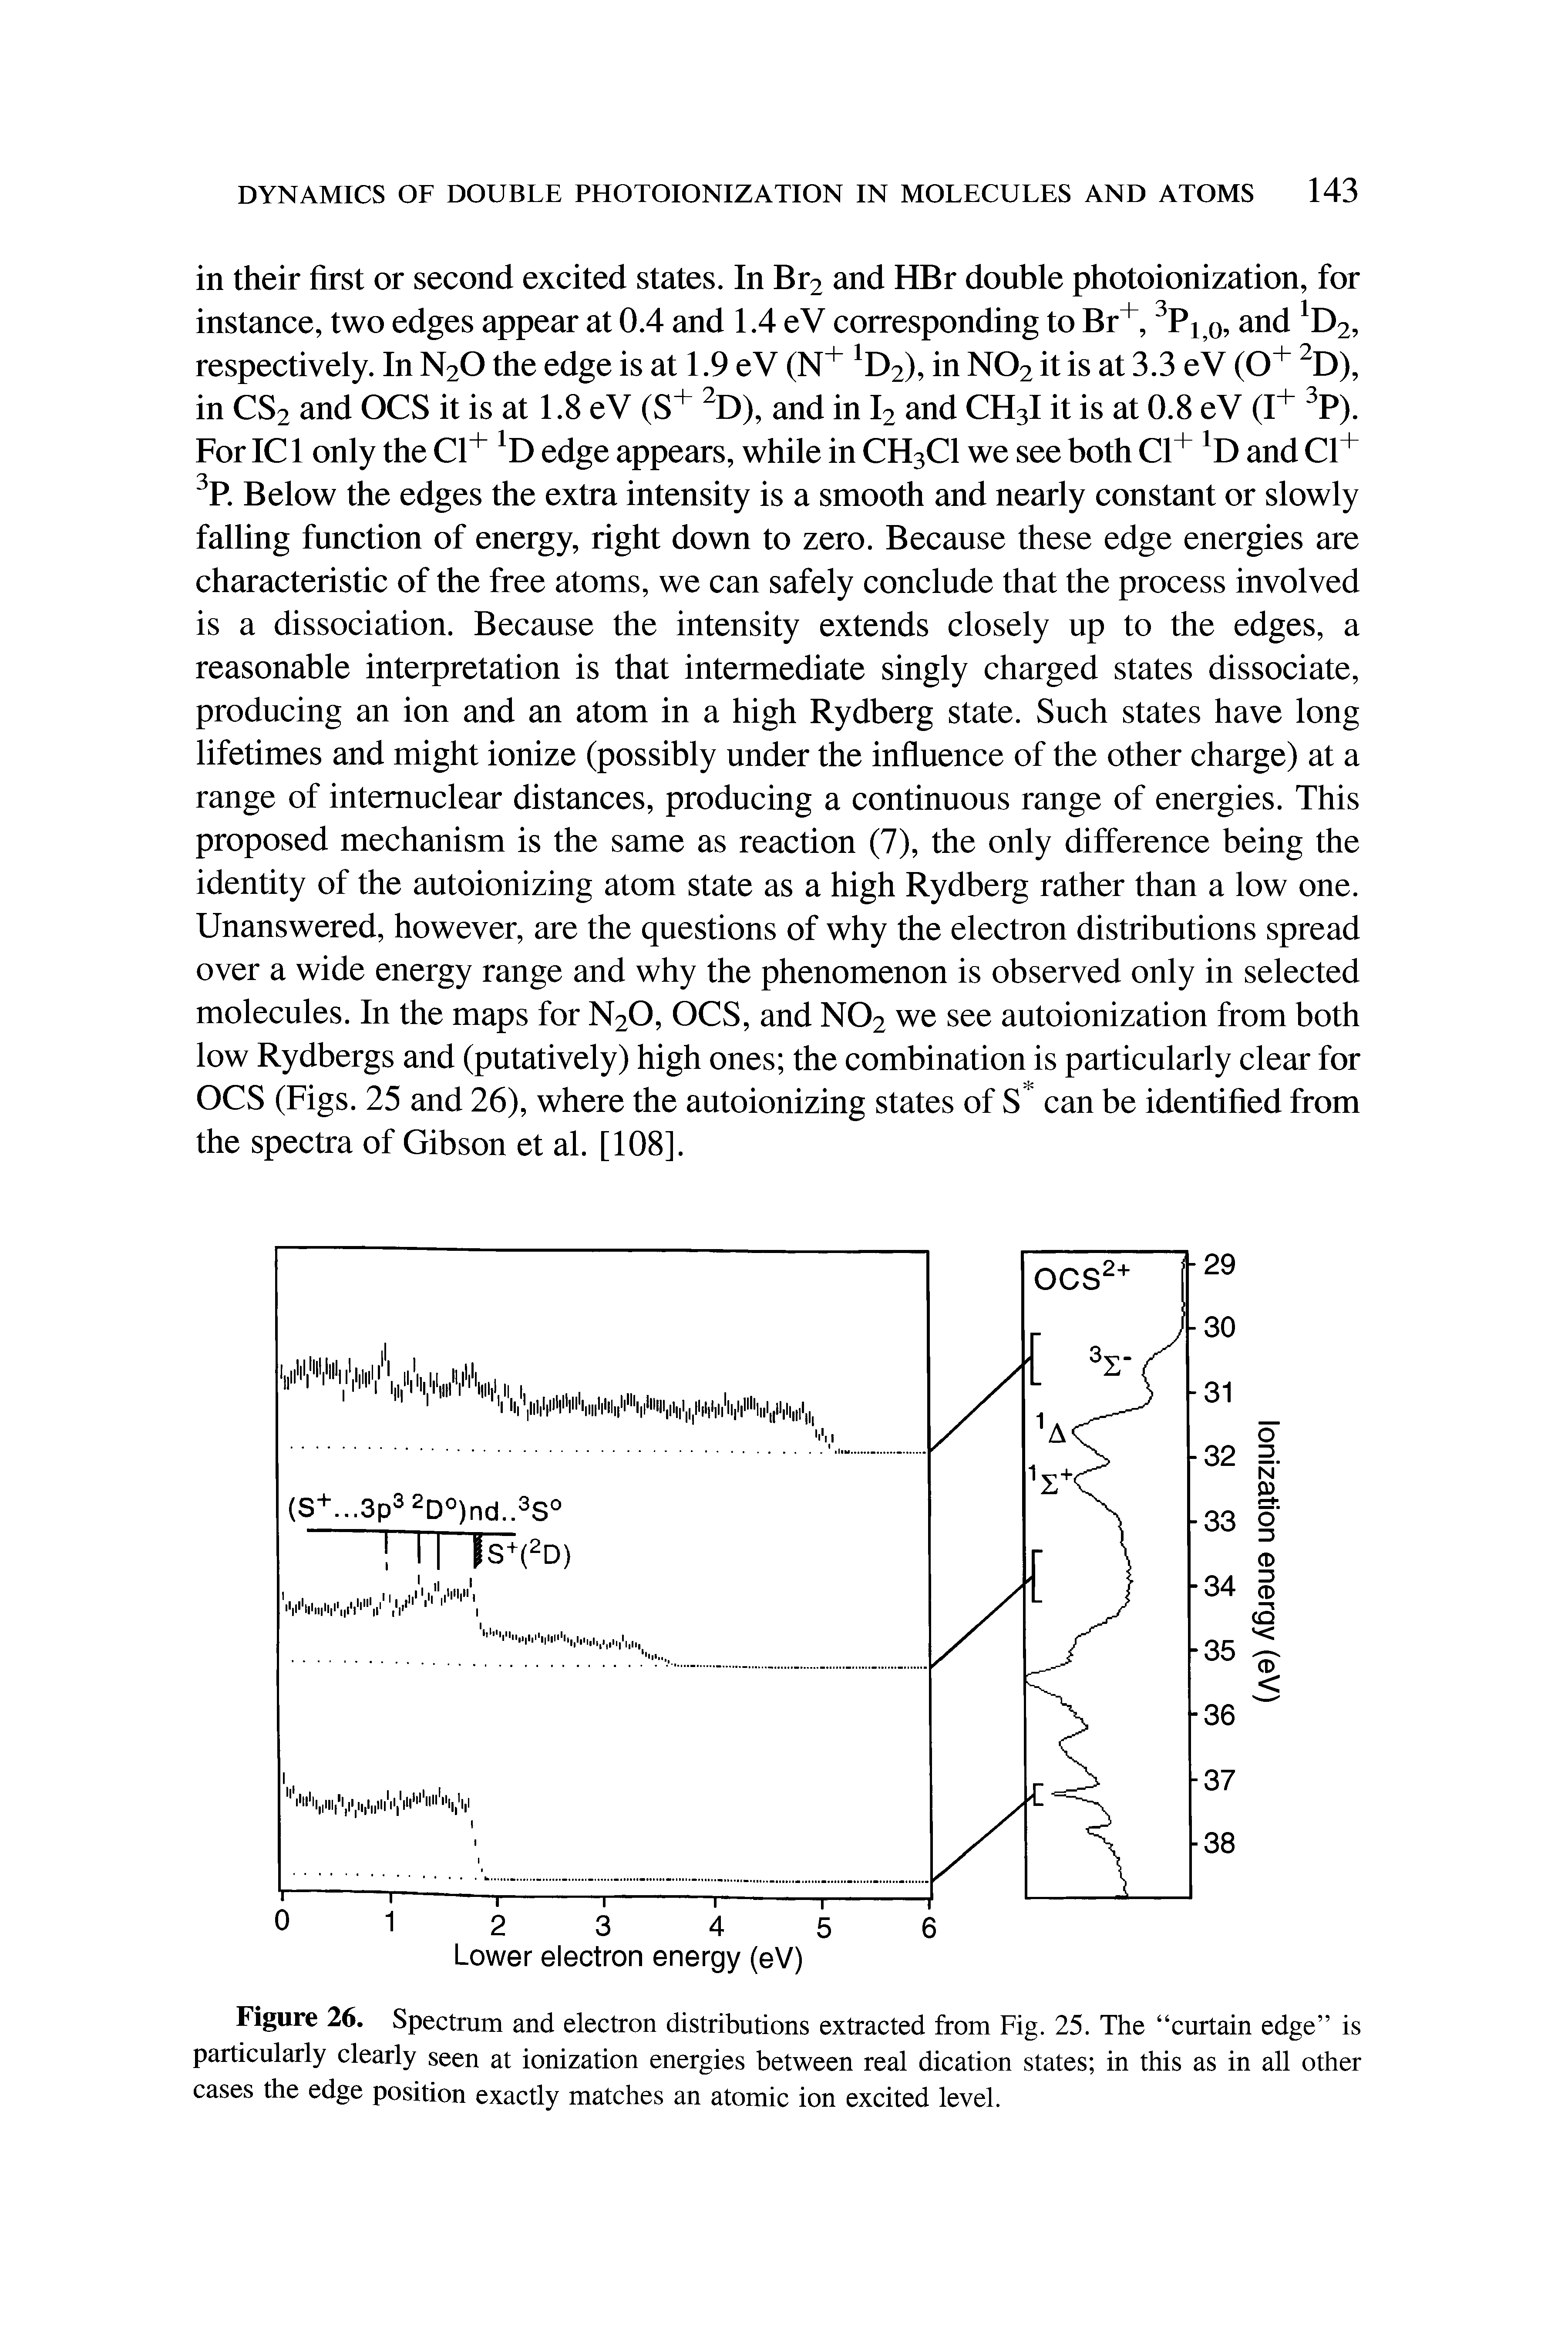 Figure 26. Spectrum and electron distributions extracted from Fig. 25. The curtain edge is particularly clearly seen at ionization energies between real dication states in this as in all other cases the edge position exactly matches an atomic ion excited level.